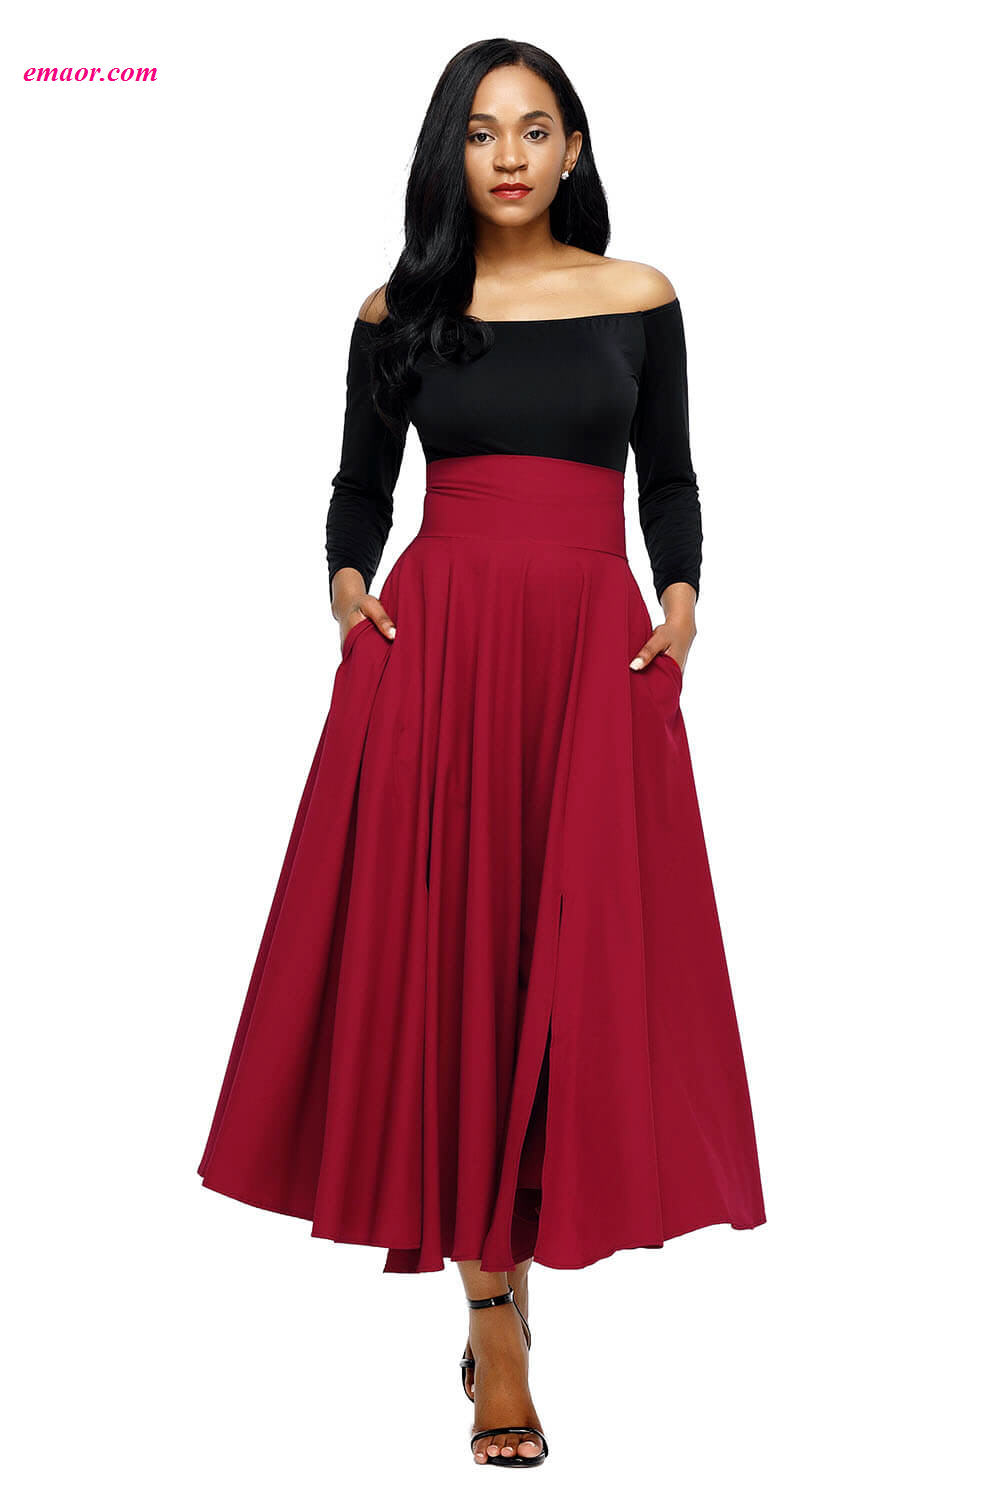  Retro High Waist Pleated Belted Hot Maxi Skirt on Sale